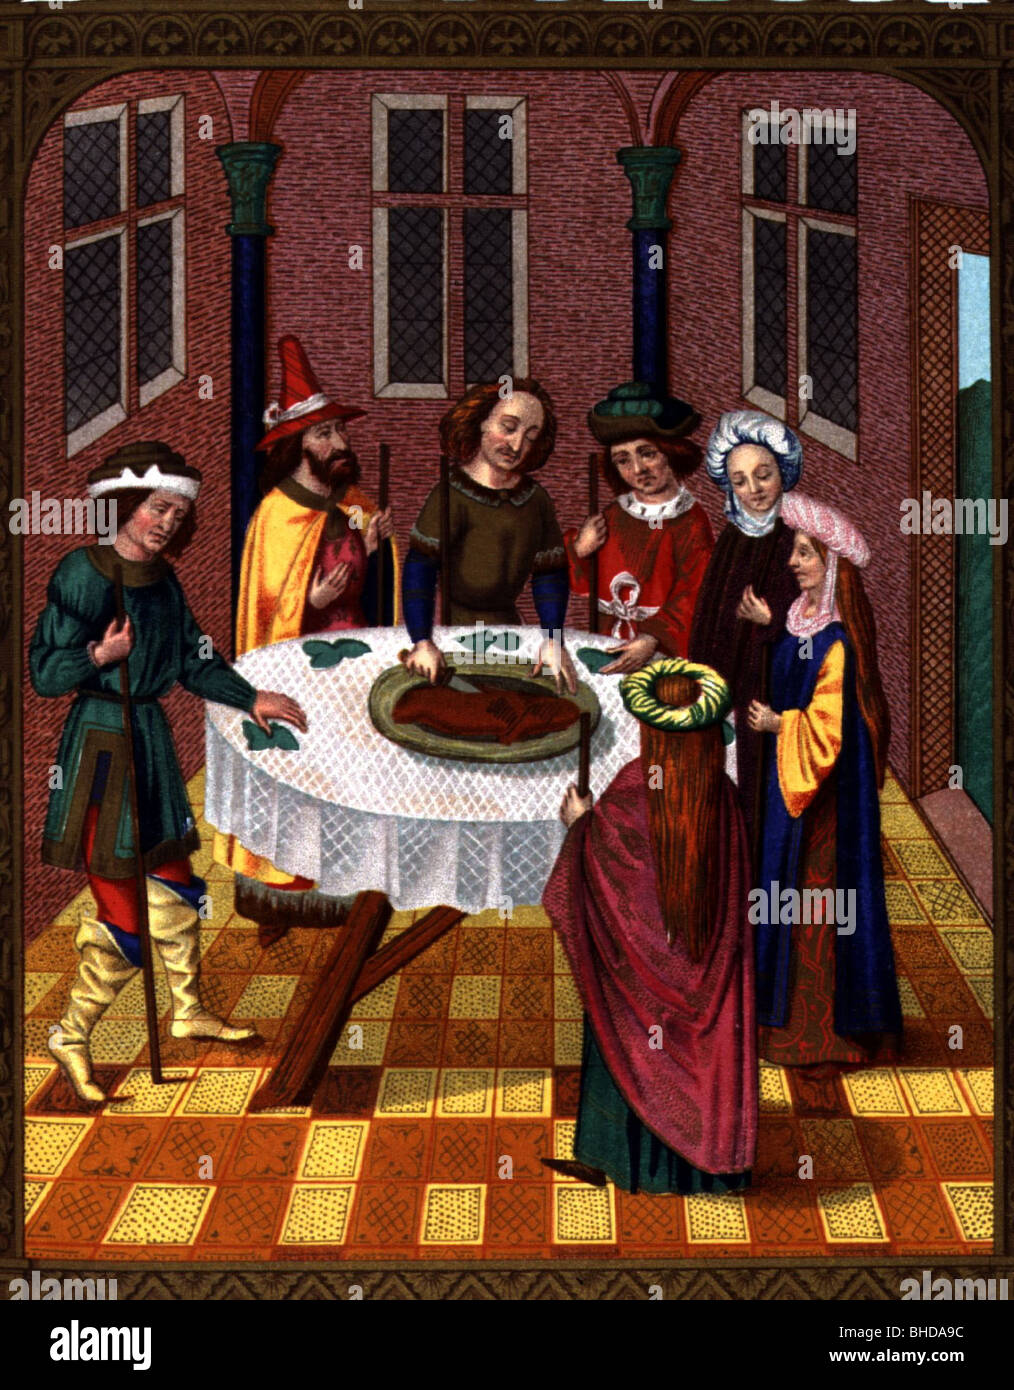 religion, Judaism, Jews celebrating Passover, chromolithograph after miniature from a missal, 15th century, painting after the school of van Eyck, Bibliotheque de l'Arsenal, Paris, historic, historical, Jewry, Middle Ages, eating, cutting bread, medieval, people, Stock Photo